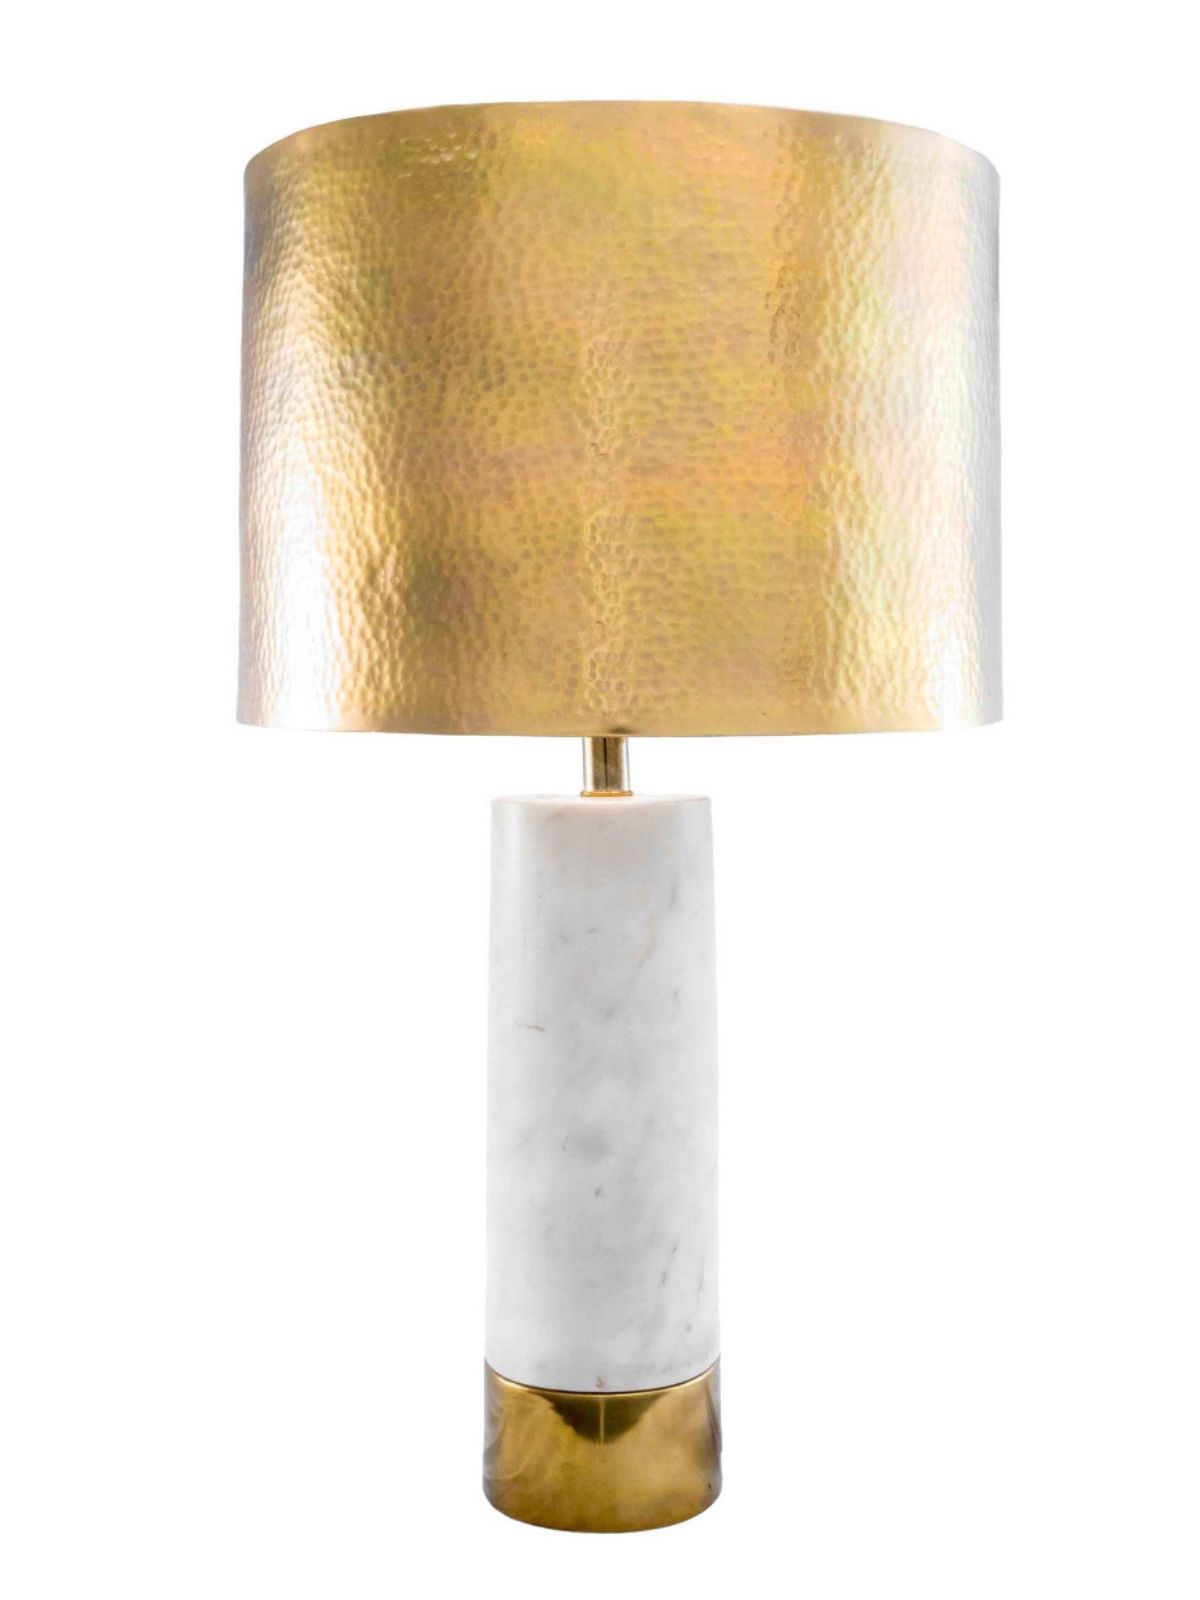 White Marble Table Lamp with Gold Hammered Shade, 23 inches.